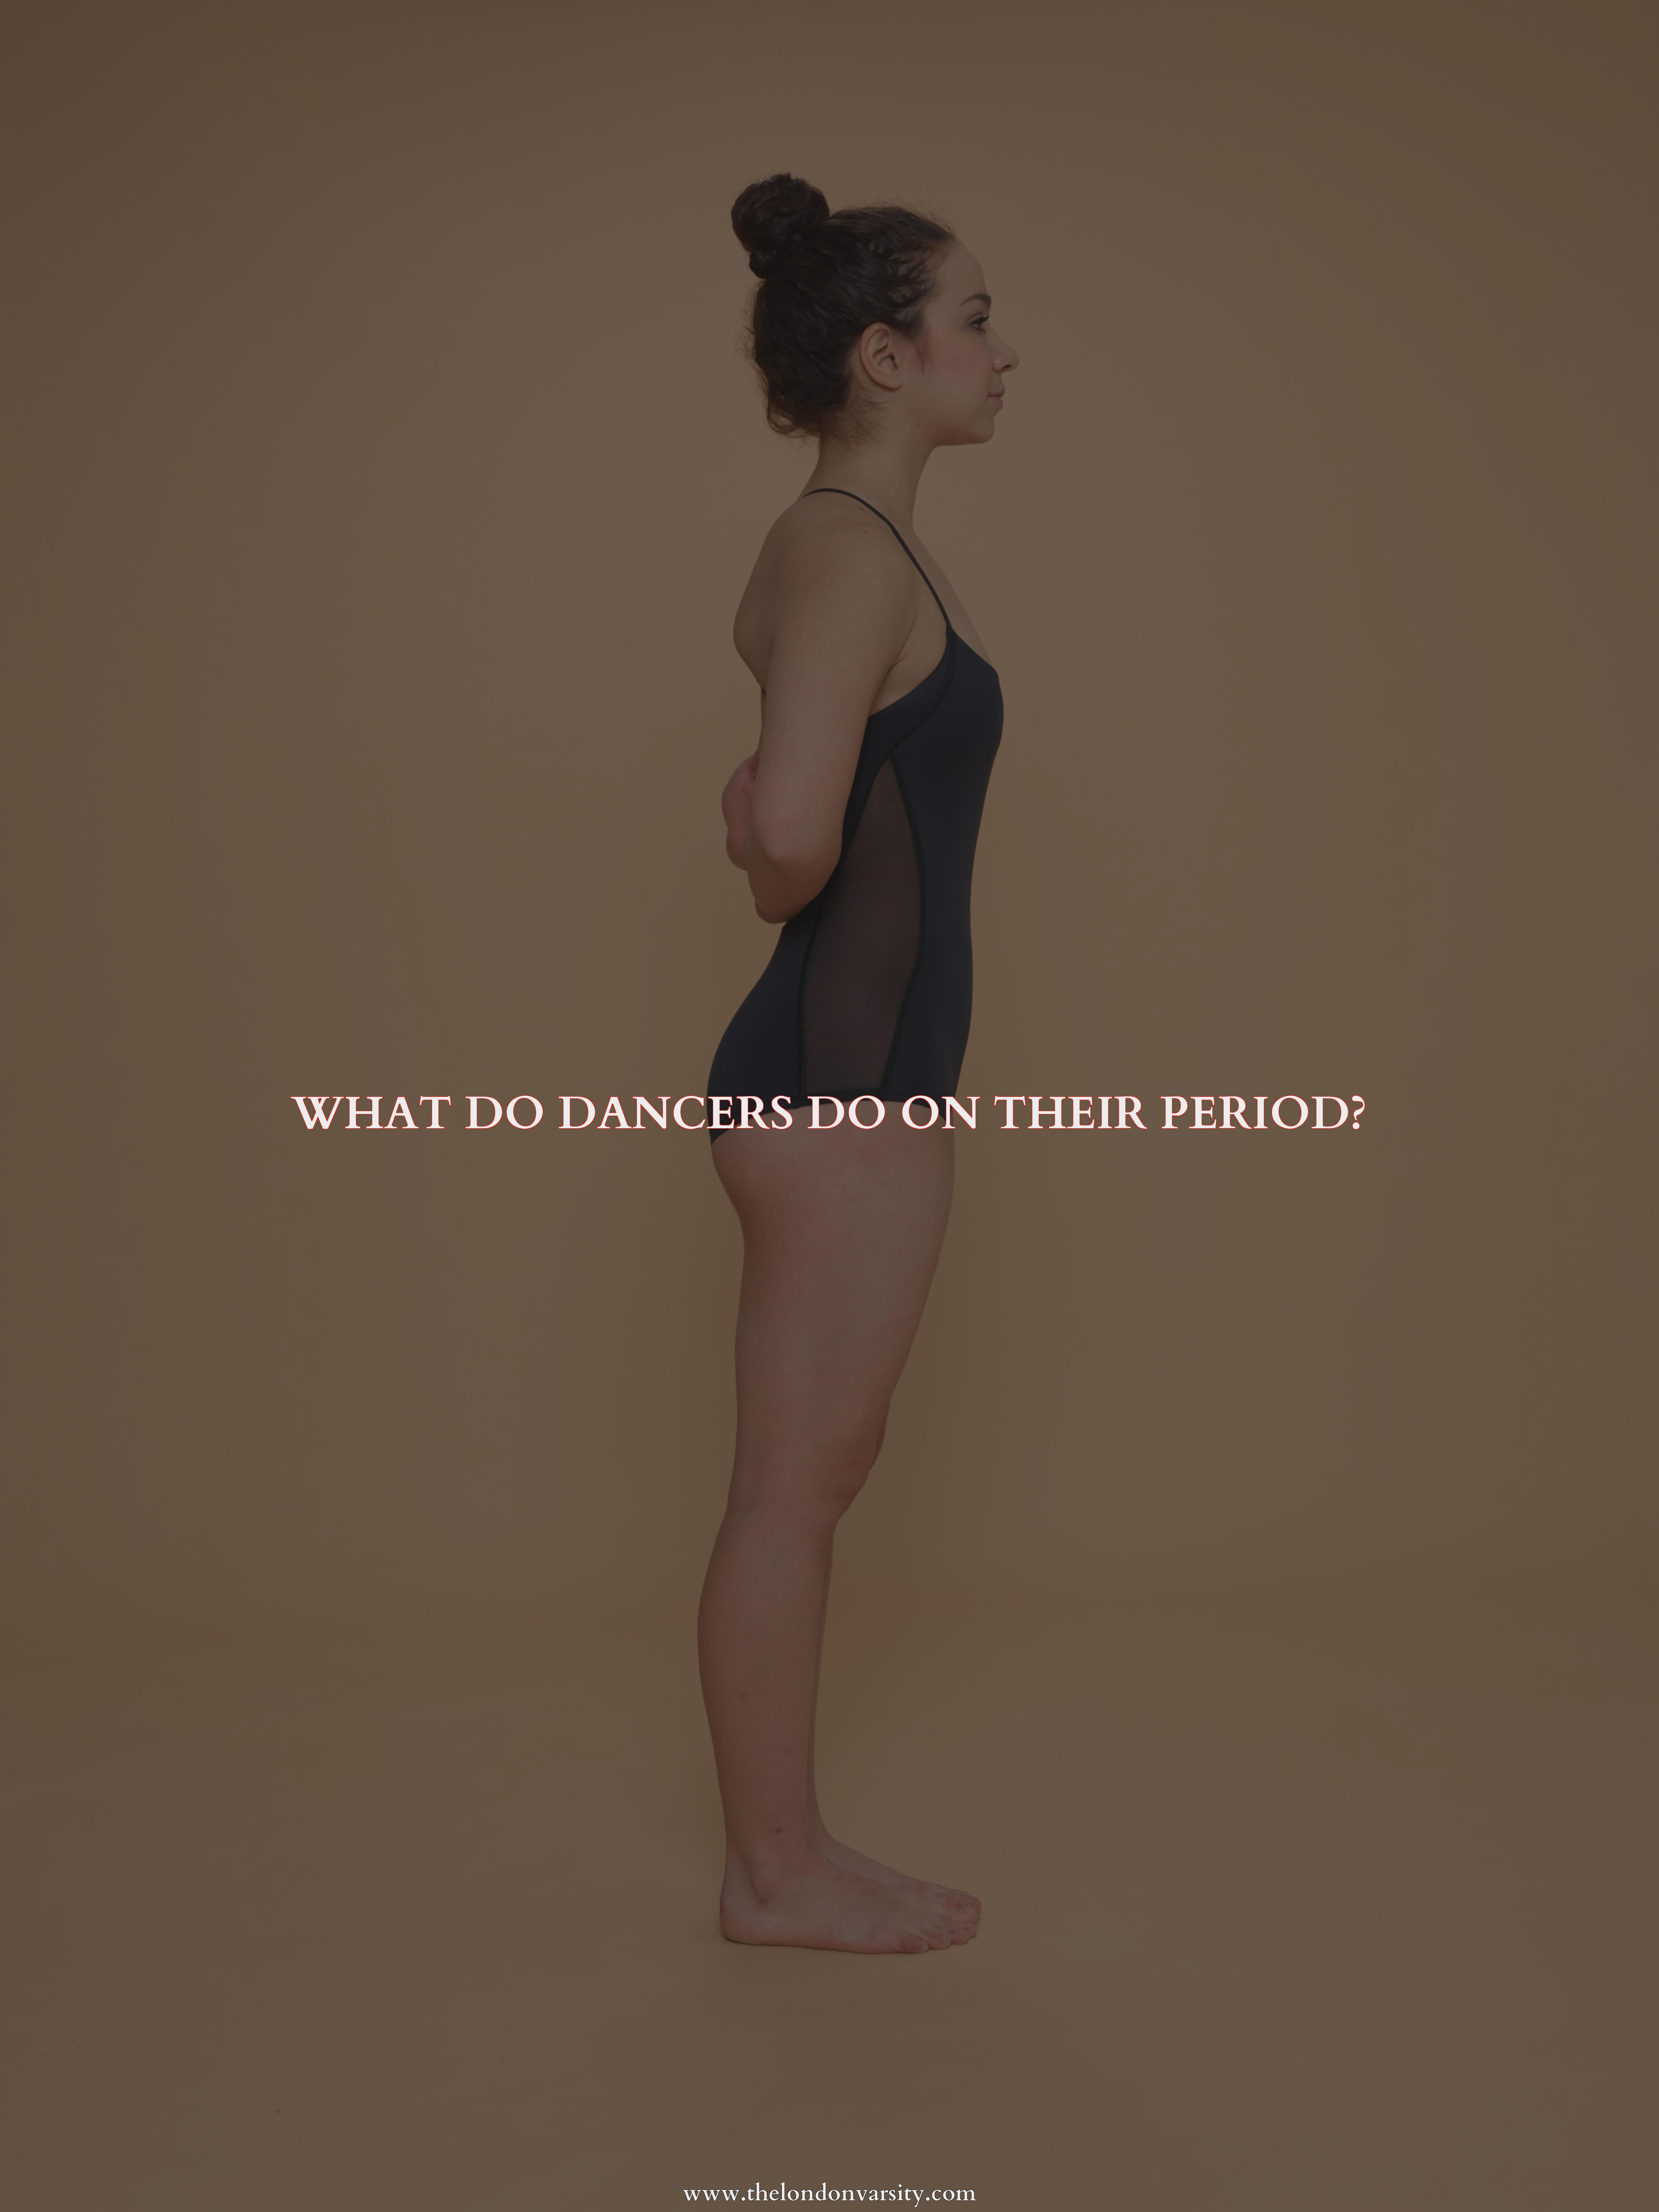 What Do Dancers Do on Their Period?